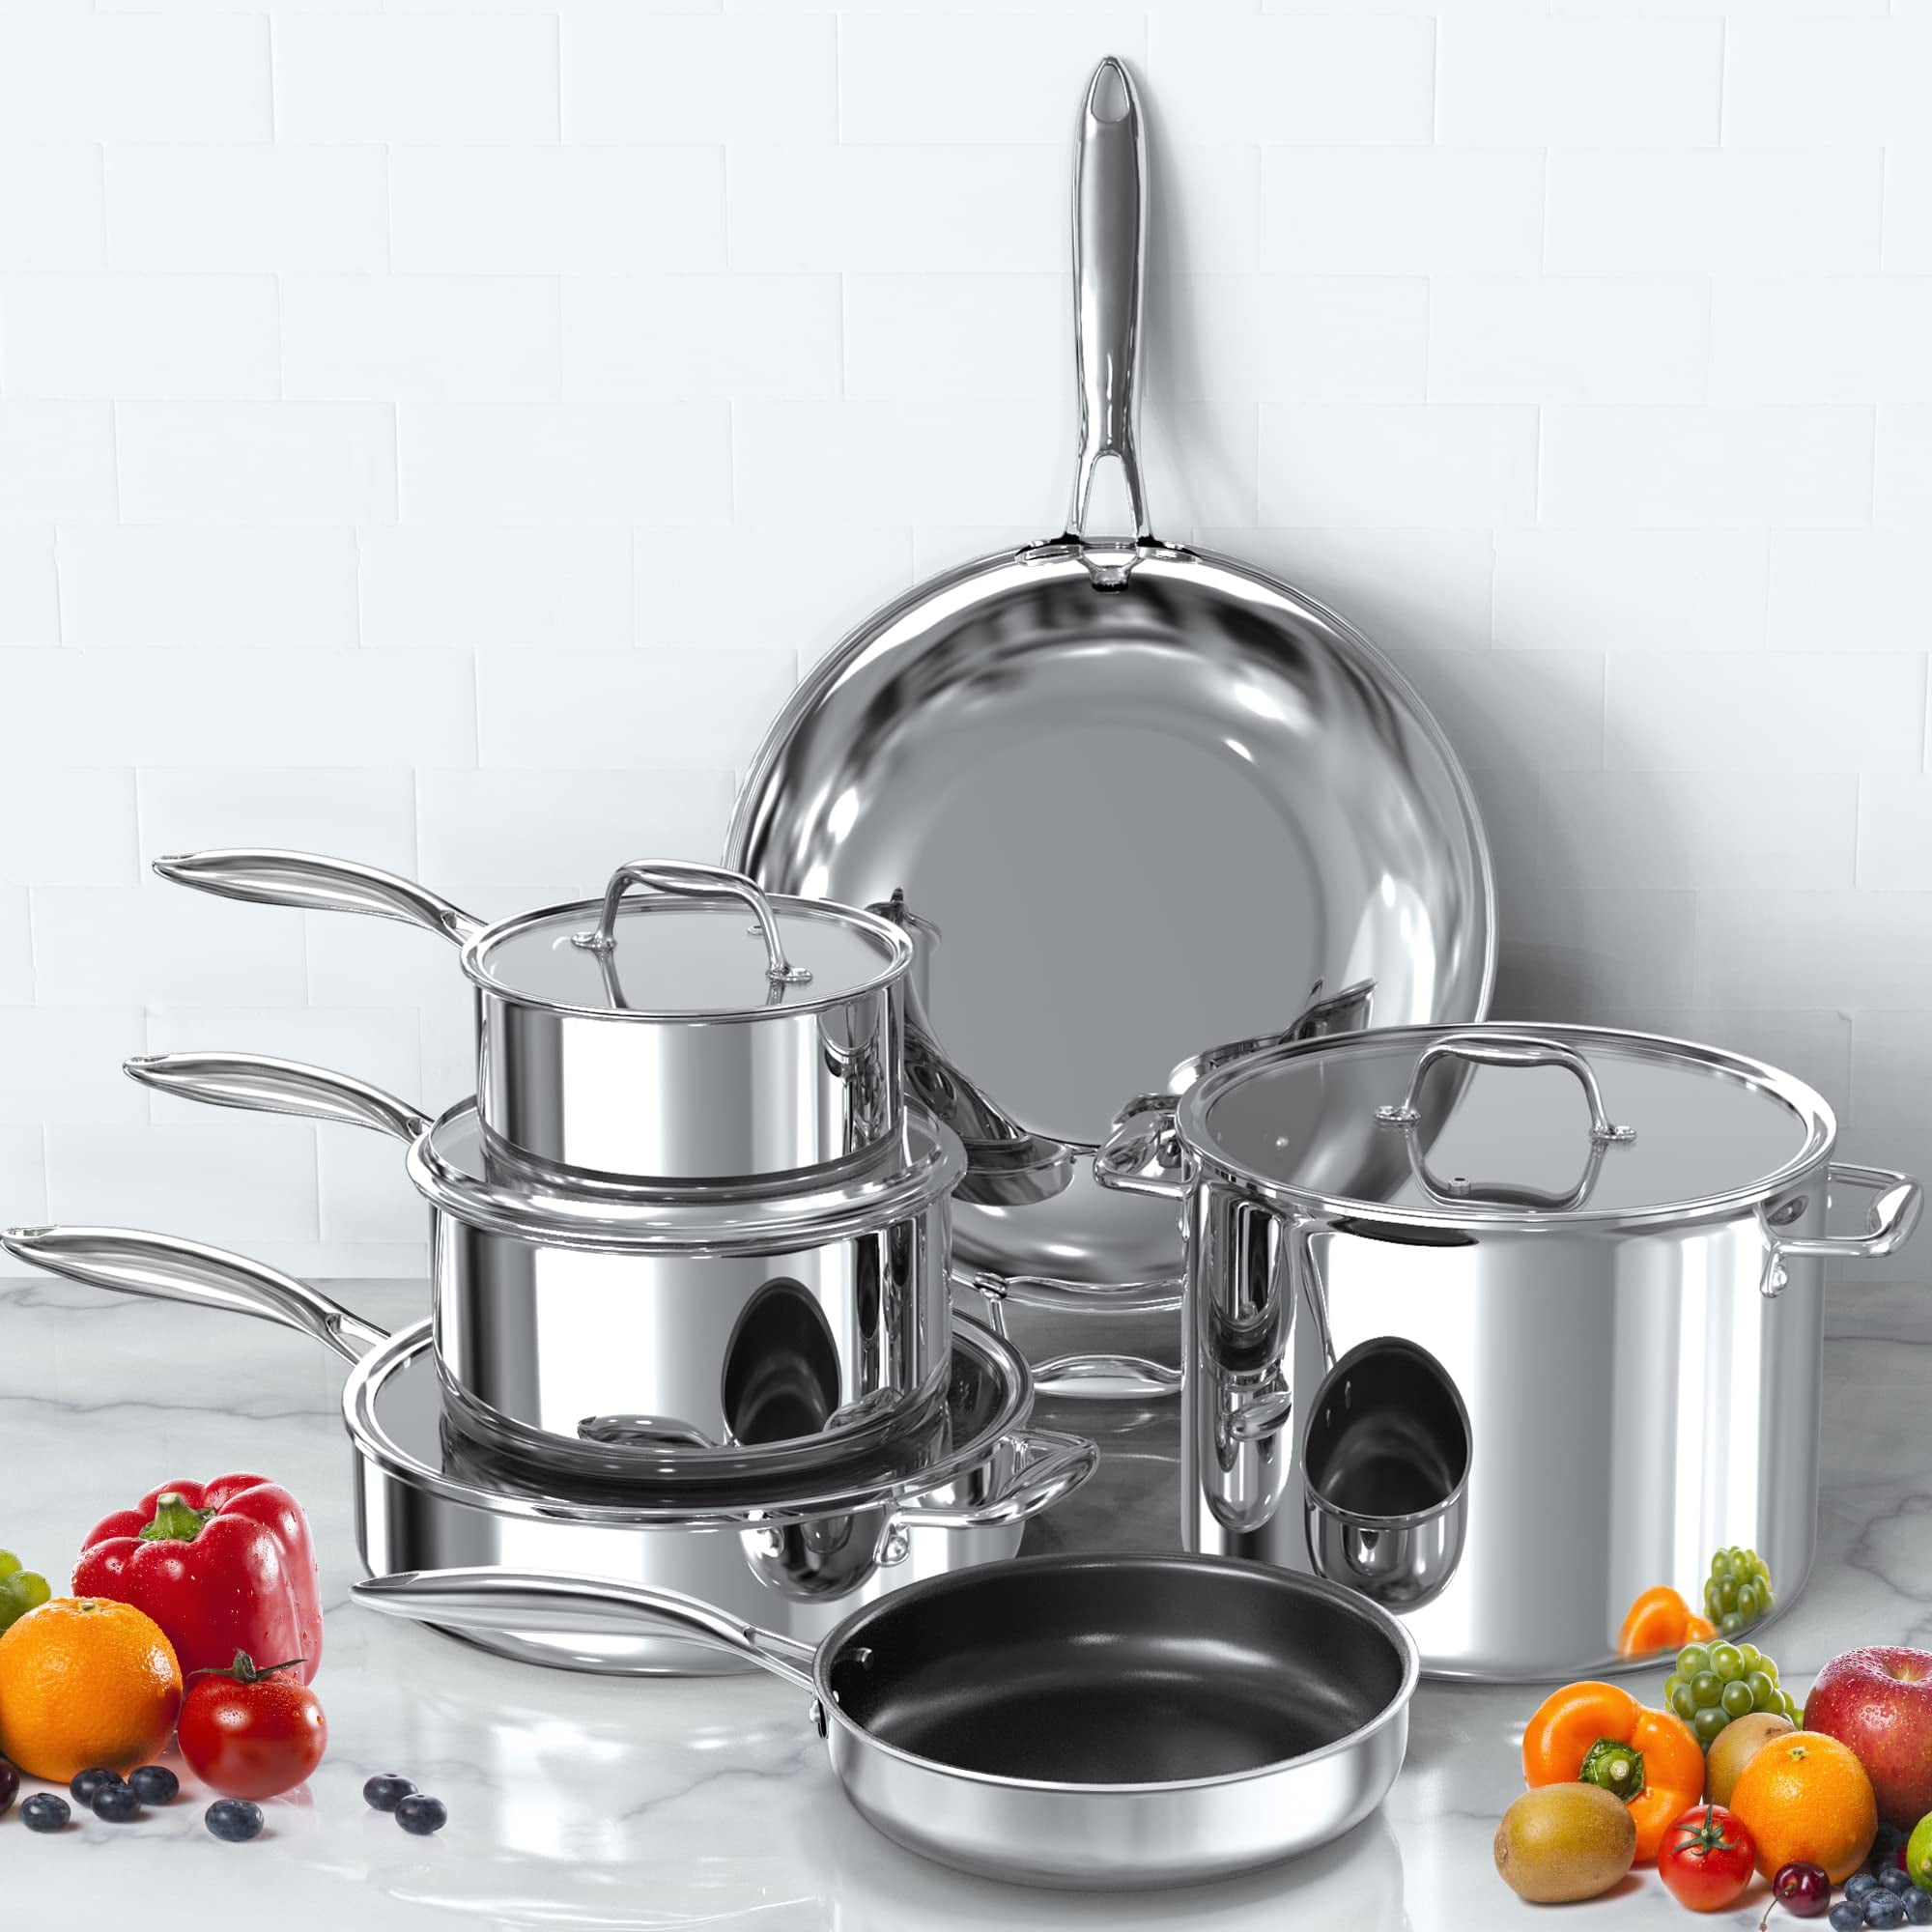 Imarku 14 Pieces Tri-Ply Three Layers Stainless Steel Cookware Set New Open  Box